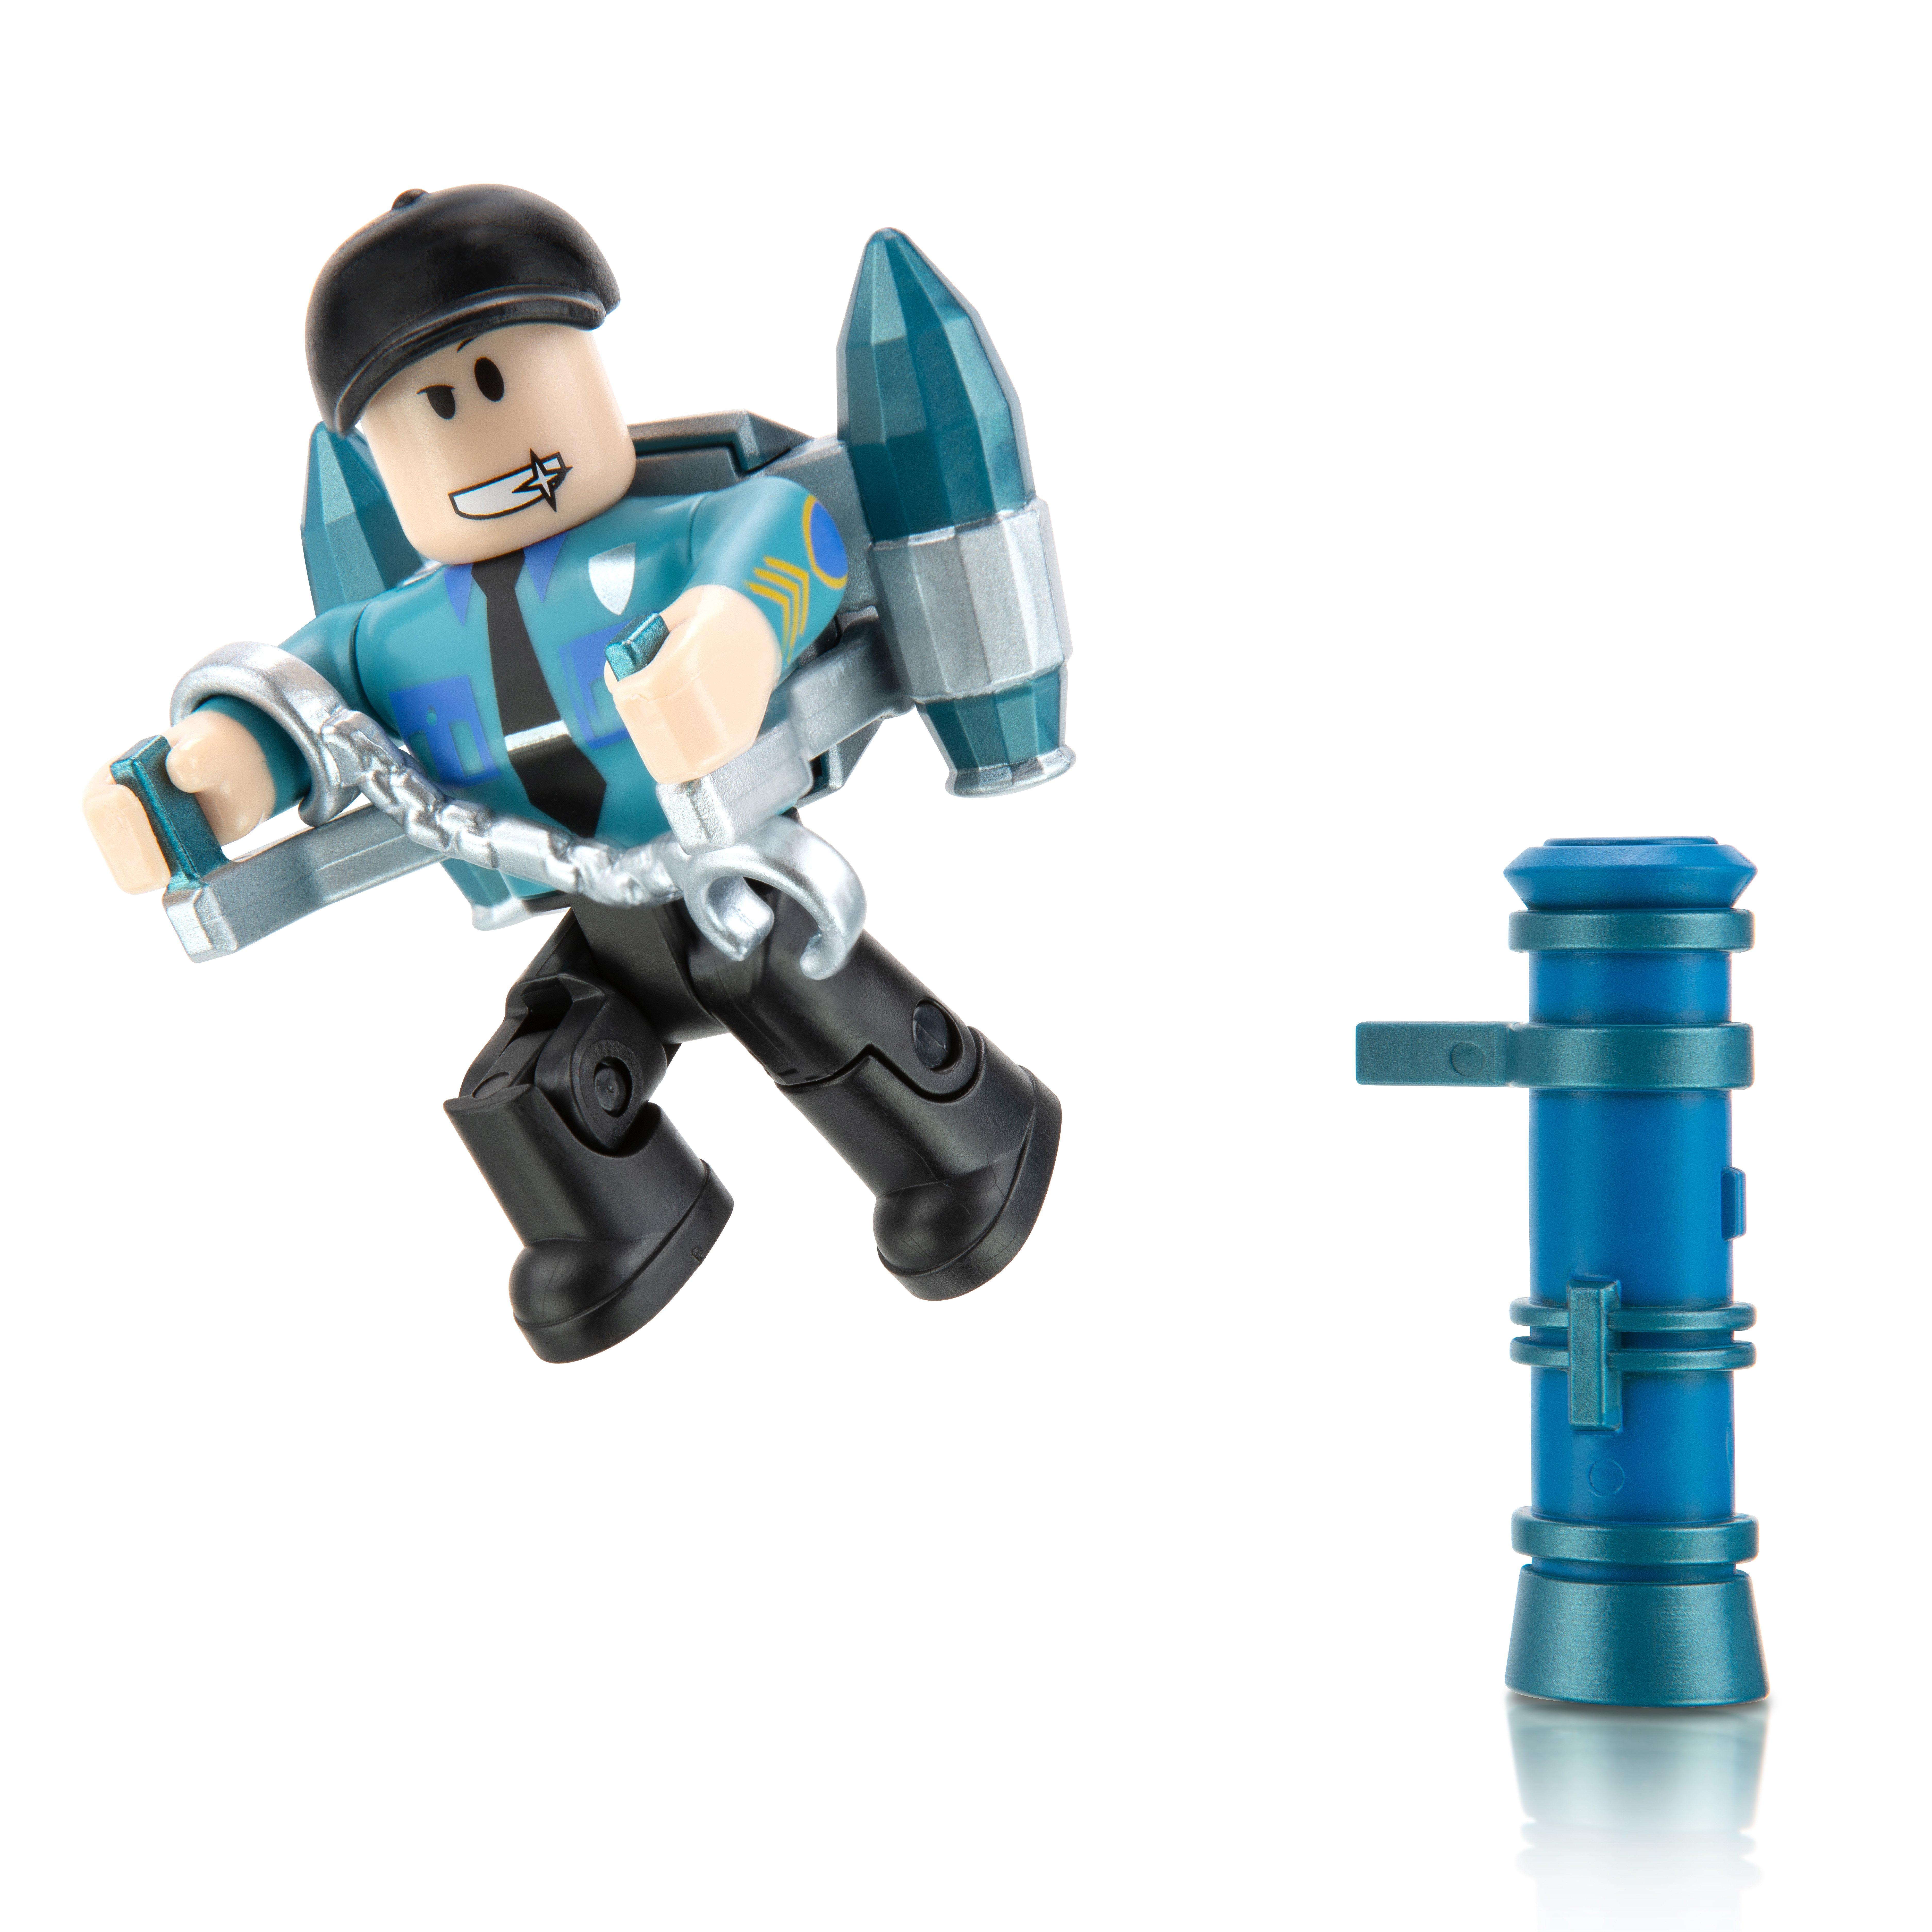 Roblox Action Collection Single Figure Pack Includes 1 Exclusive Virtual Item Styles May Vary Gamestop - roblox toys series 2 list